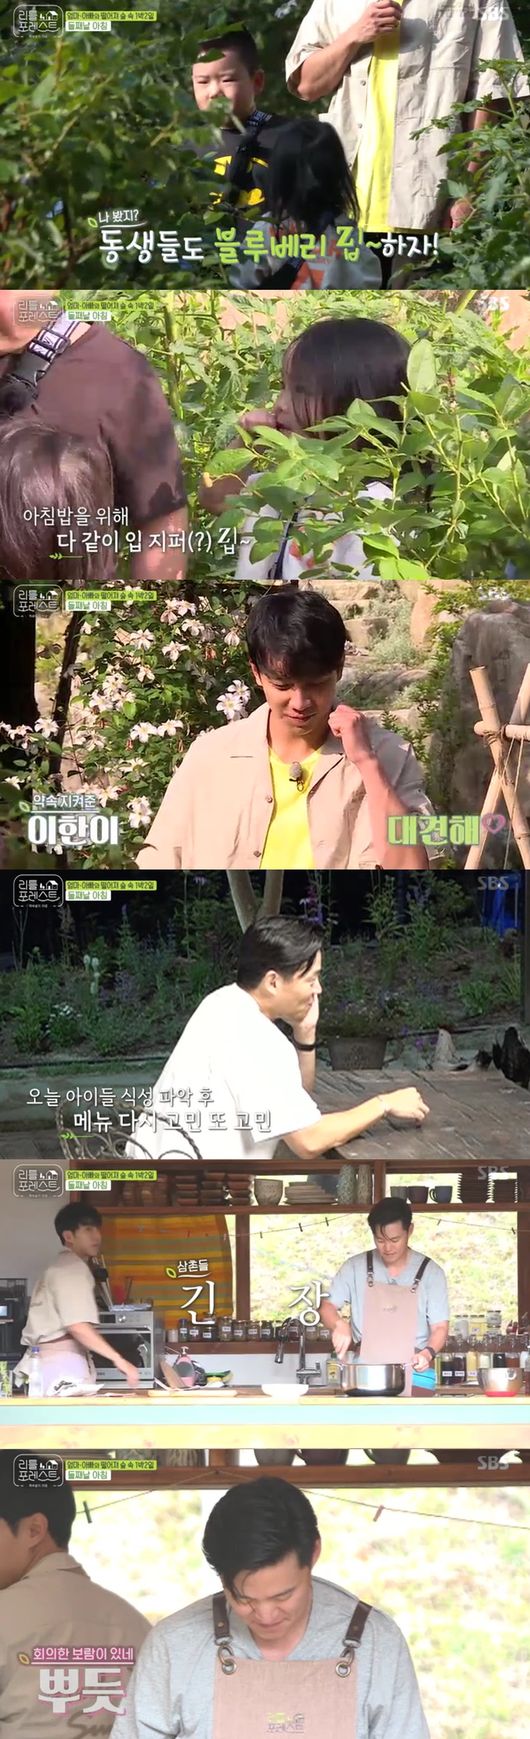 With time with ONT Little, the first parting was drawn.On the 20th, SBS entertainment Little Forest was bright on the second morning of the forest 1 night and 2 days.Lee Seung-gi headed to the Blueberry Farm with the children; Jung So-min also woke up, opening the blanket with the children.Lee Seo-jin was in trouble with the menu after grasping the childrens eating habits, recalling the emergency meeting of the meal menu the day before.Rainwater grew stronger. Lee Seo-jin said, The children said that the blueberries would be wet. Shimkung and Lee Seung-gi also fell in love with too cute children.However, he said, When it rains, I bake meat and I want a cup of soju. Park Na-rae also said, It is a wave in Dongdongju.At this time, I recalled the raindrops that stimulated the childrens five senses. The children appeared cute in raincoats, and the carers headed out with the children, saying, Lets go to hear the rain.Park Na-rae started a rainwater game, telling children to gather rainwater.Jung So-min also participated in the childrens ONT play, and Lee Seung-gi said, I will give you something delicious if you collect a lot of rainwater.He then became a rainwater play assistant and fell into play with children.I went on to the field with my children, to pick the turnip, a straight-goal filial piety.Lee Han-yi was proud of picking up a turnip of the world, and Lee Seung-gi, who watched it, also caught his belly button.Lee approached Brock and said, I will pick a big one. He picked a turnip for Brock. The pure seven-year-old genuine smiles at his mouth.Jung So-min helped Lee Seo-jins cooking and said, Its really beautiful, children. I thought my mothers heart would be like this.Lee Seo-jin smiled, saying, Im about to have a baby. Besides, the children opened their minds a little and showed a sharp look in two days.The dinner menu made by Lee Seo-jin was anhydrous tomato curry; while Lee Han was eating the storm, Lee Seung-gi said, You have to pick this up to get a pretty tooth.Park Na-rae, Jung So-min and Lee Seo-jin were also accompanied by them; when Brooke had to pick it, Lee Han-yi was worried.Lee Seung-gi said, He said Hello and naturally succeeded.Lee Seung-gi was also delighted to say, I solved my lifes troubles, and Lee Han-yi boasted of it with a dignified pride, saying, I show this minus.Park Na-rae put a One hundred thousand won in his hand and laughed once again.The first parting was drawn in the shoot, and when it was time to go, the children cried at the sound of their mother.Then, when the mothers arrived one by one, the children welcomed them, but they said, I will not go.In addition, I was satisfied with the forest time, saying to my mothers, I have to come here every day. It was a short time, but the height of the childrens heart was one more time.Next week, I was more excited to announce new Little.Little Forest broadcast screen capture